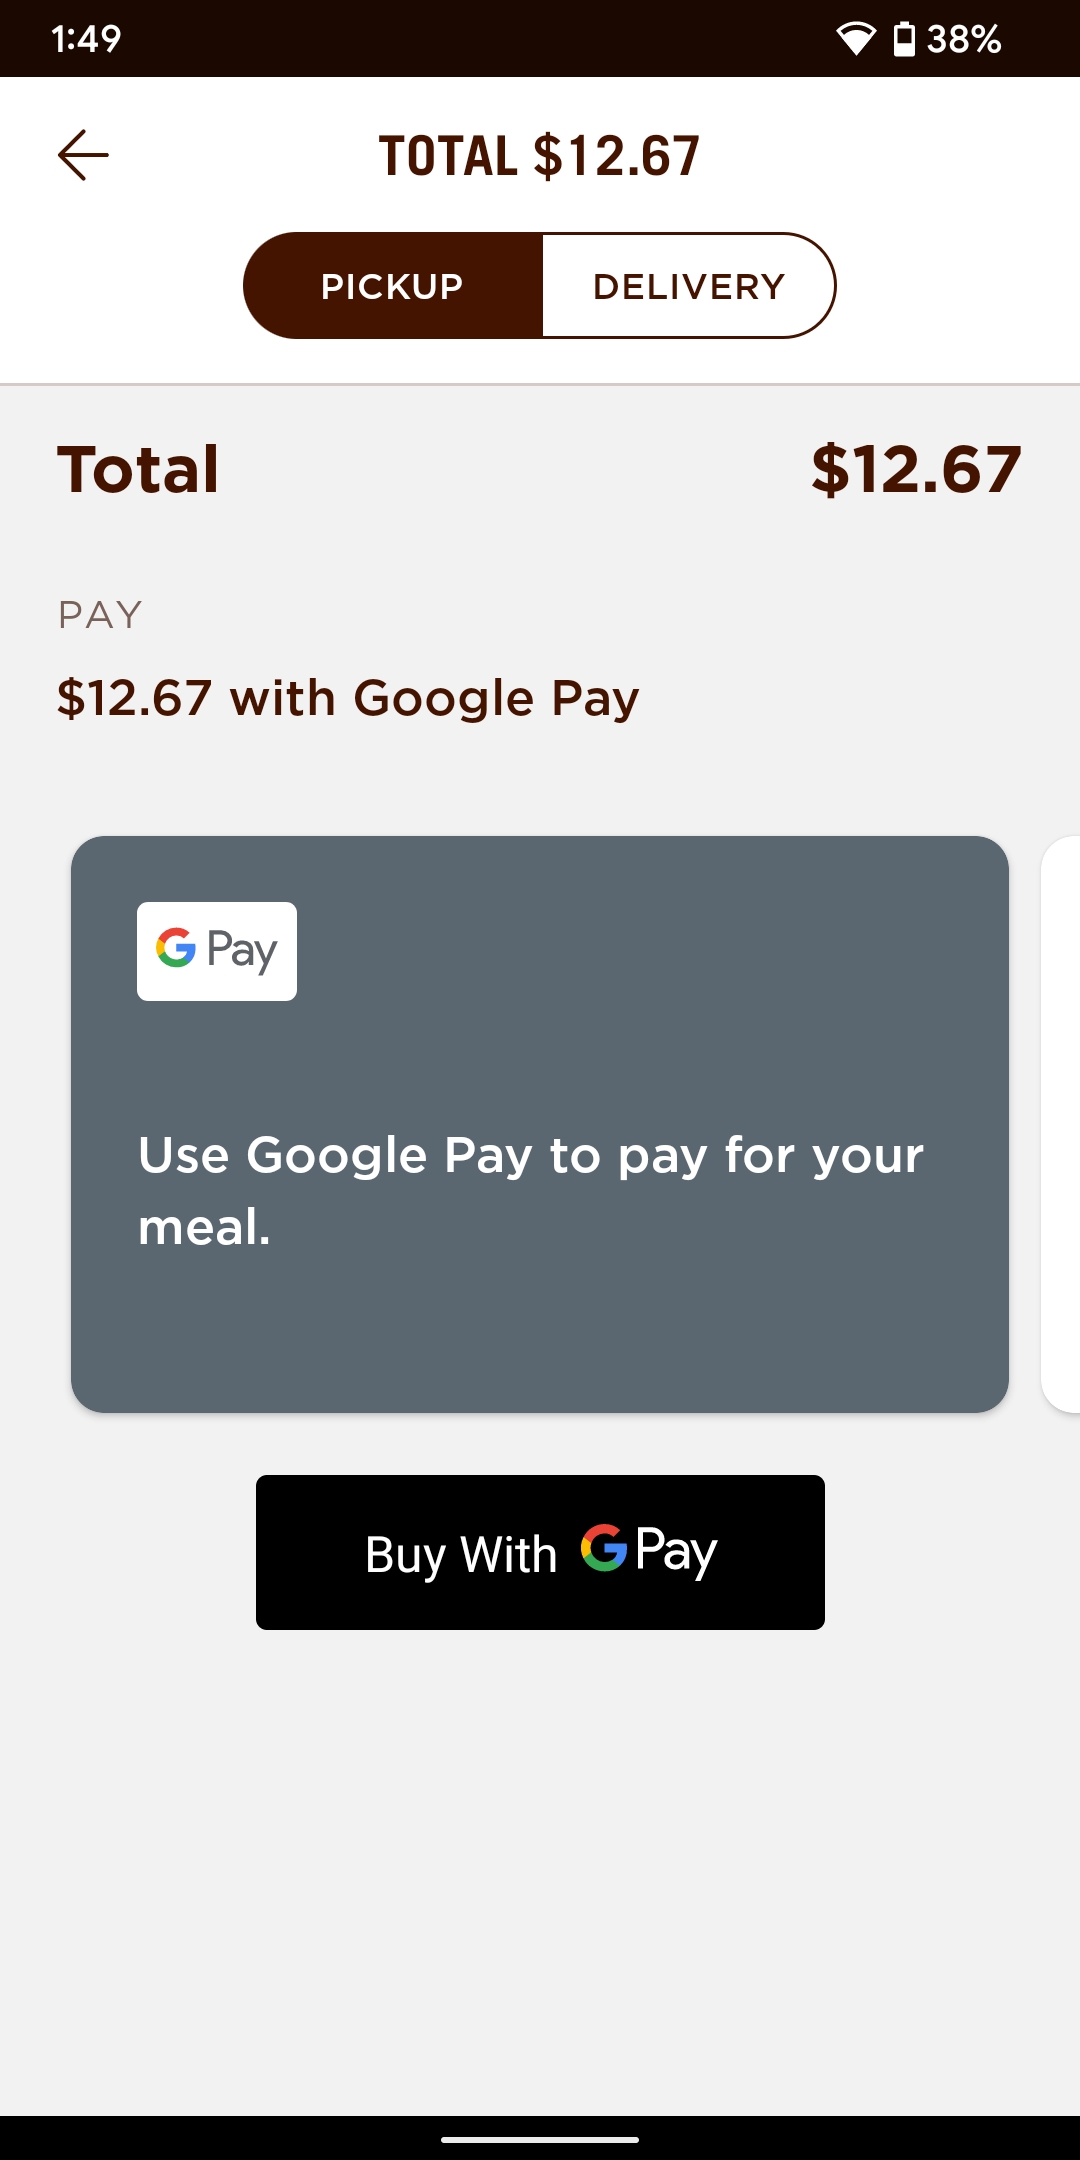 Chipotle accepts Google Pay in its Android app.